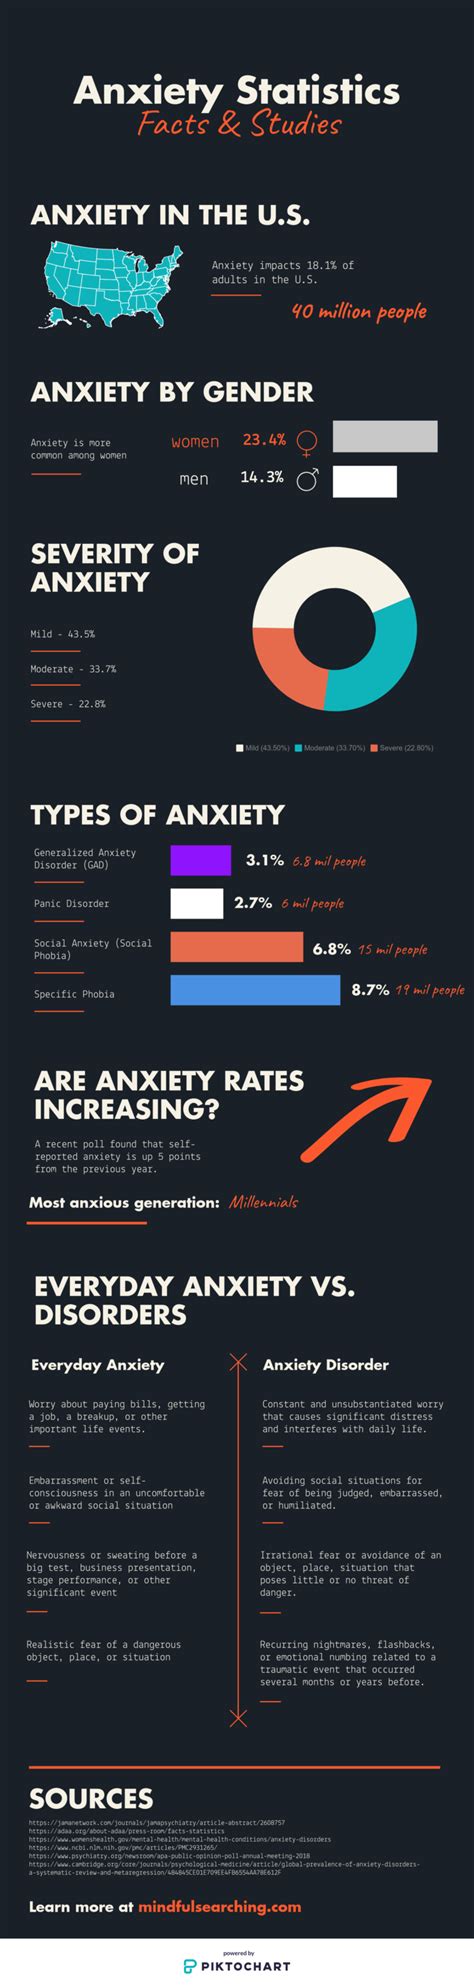 infographic anxiety statistics u s and worldwide infographic tv